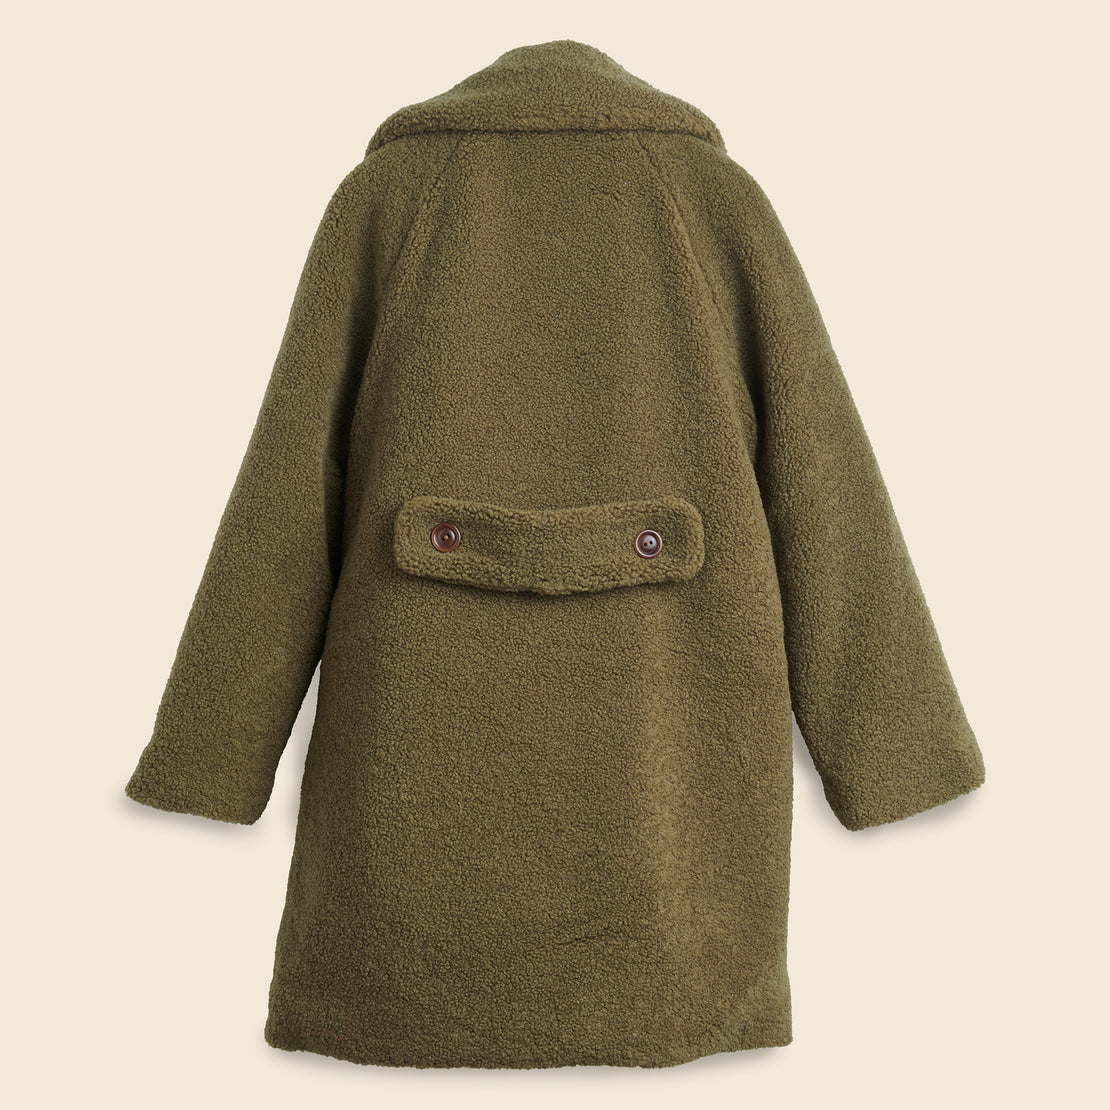 Jacob Sherpa Coat - Olive Bark - Alex Mill - STAG Provisions - W - Outerwear - Coat/Jacket